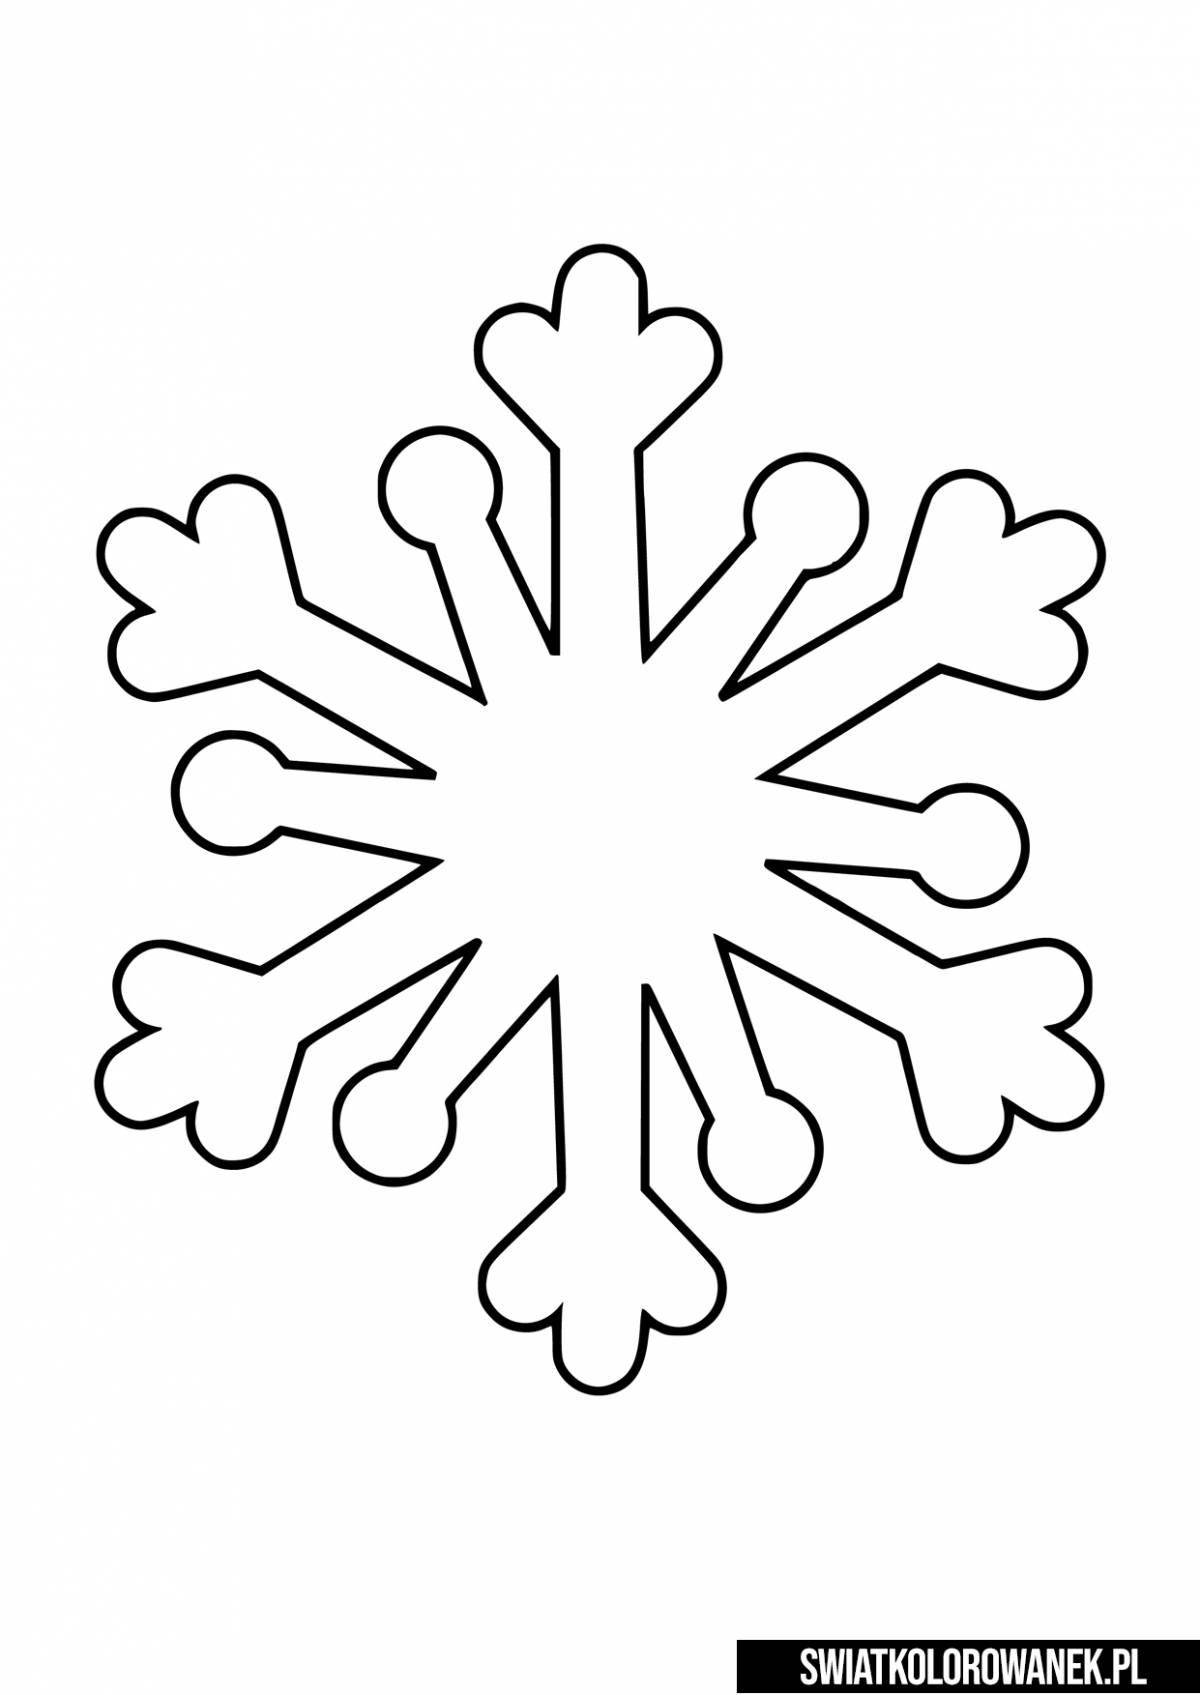 Bright coloring of snowflakes for children 4-5 years old in kindergarten